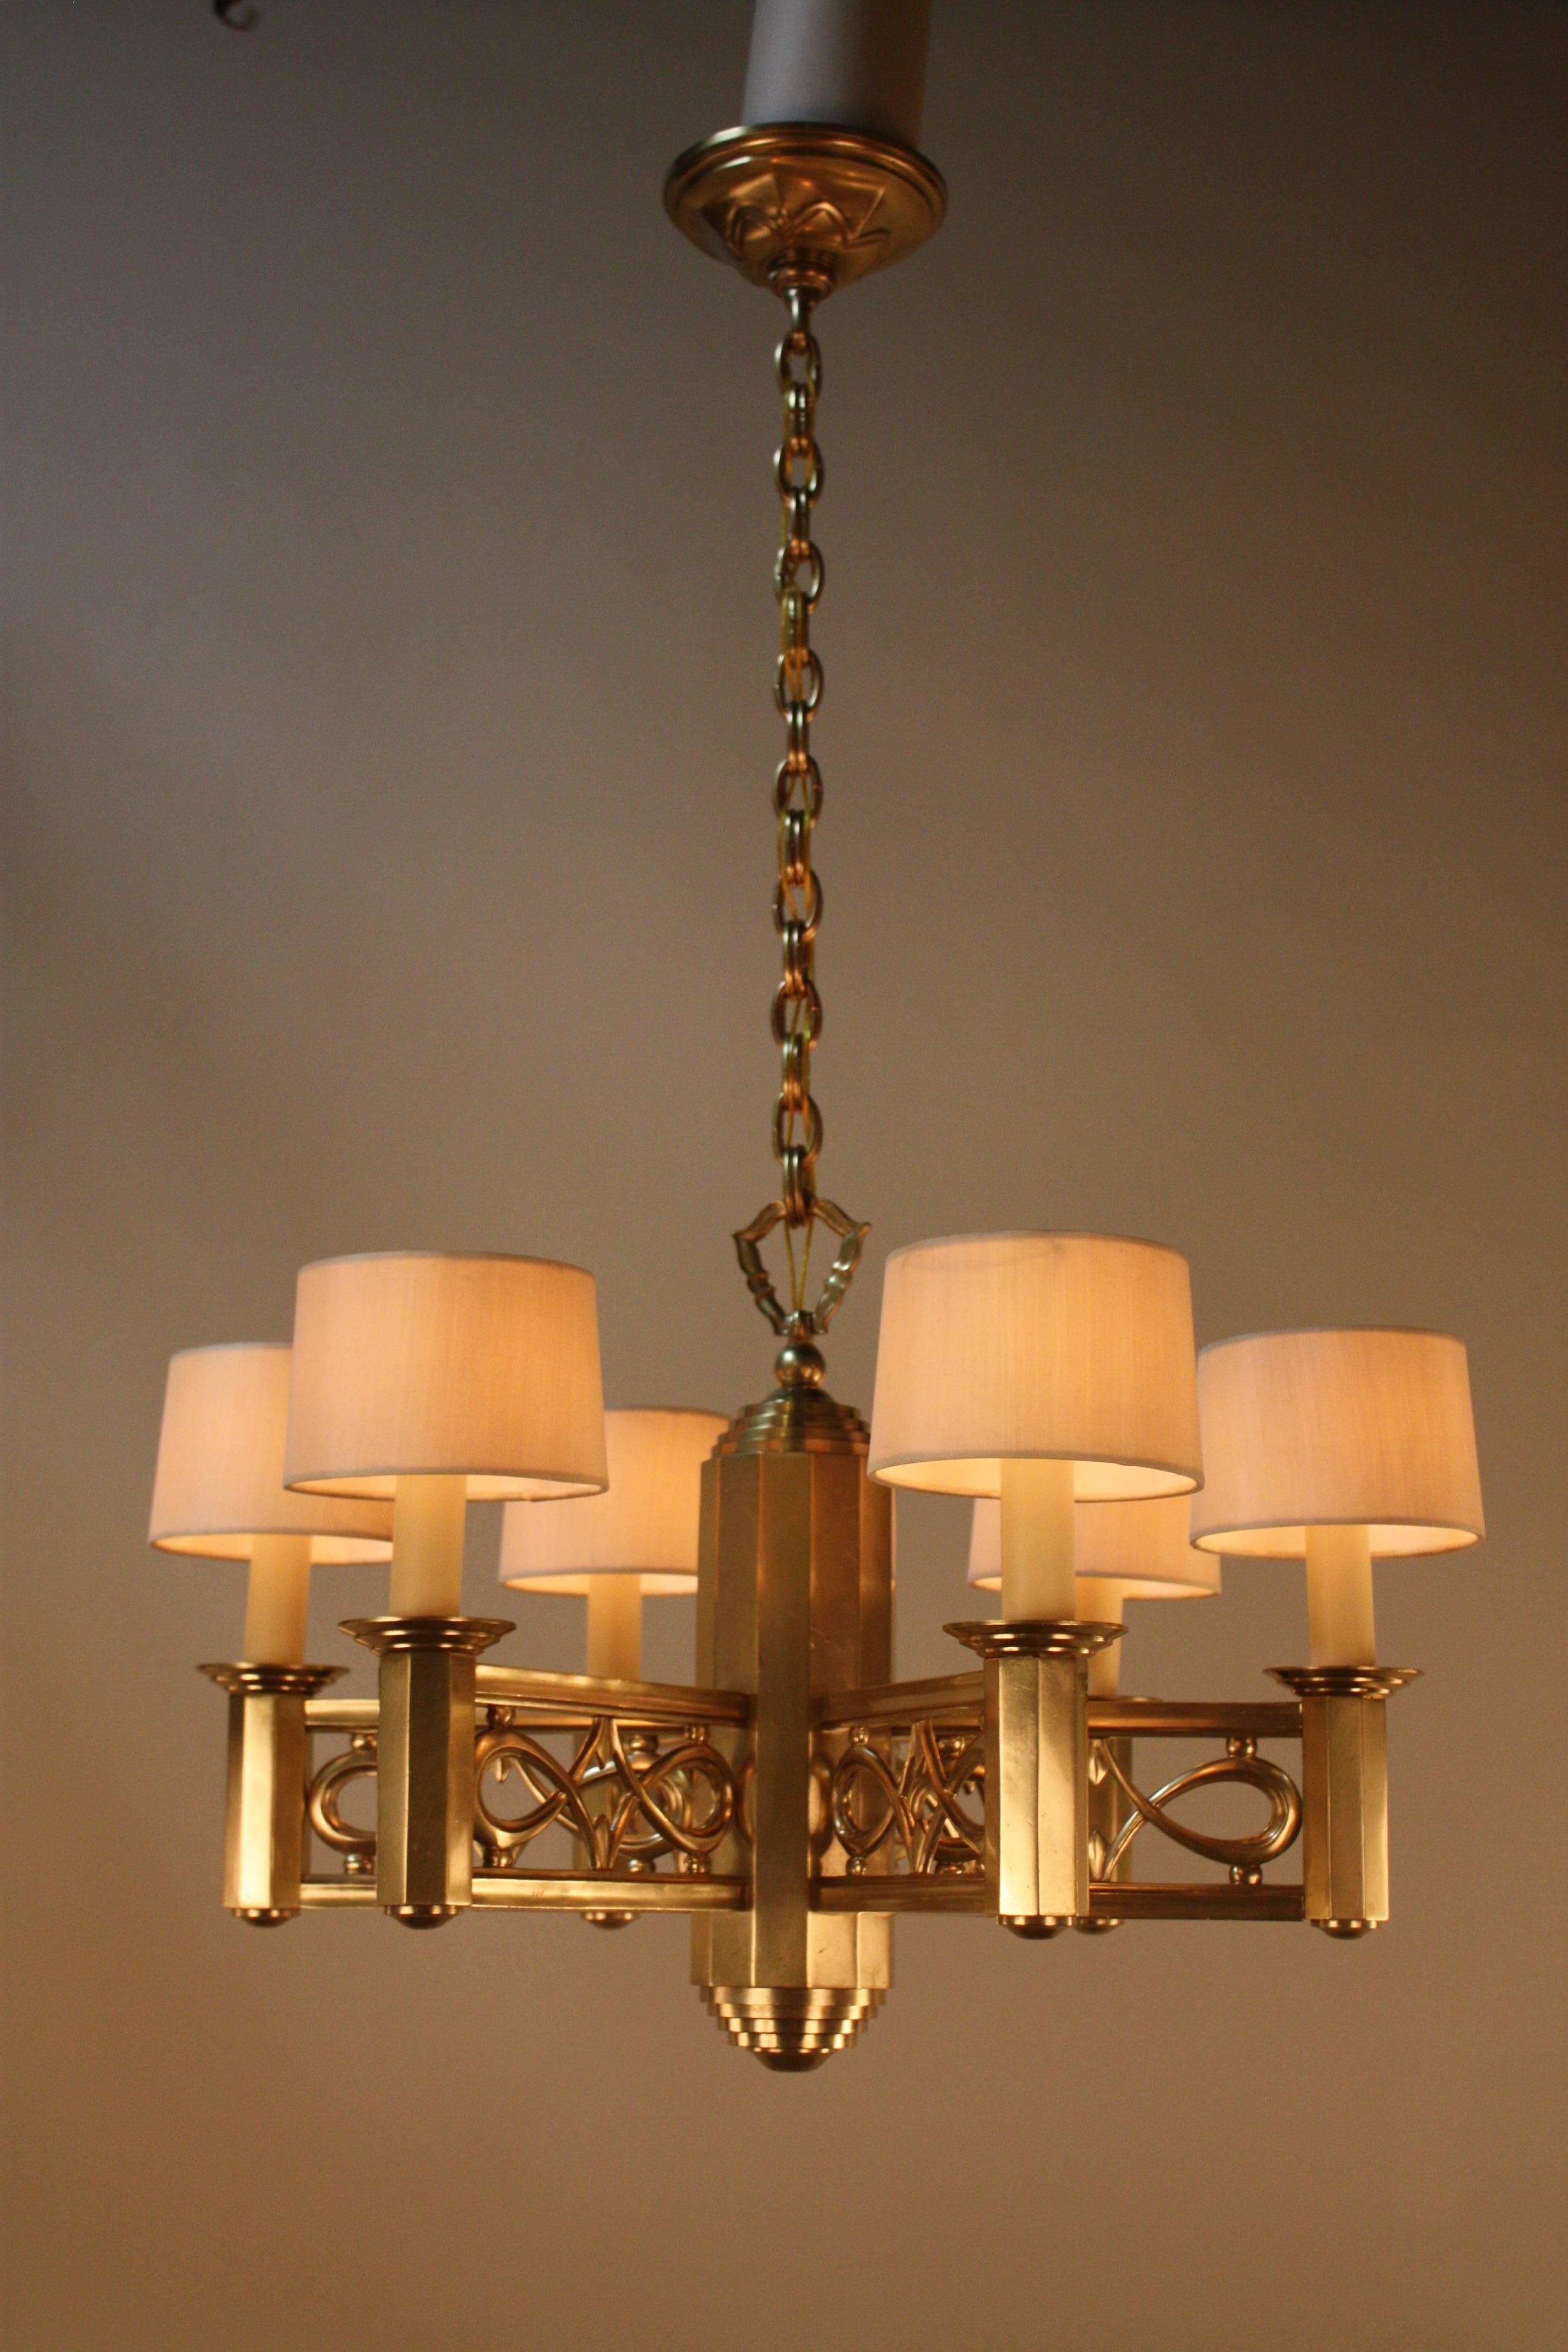 Elegant, beautifully designed six-light bronze chandelier 
Minimum height fully installed with one link of chain and canopy is 24' and has some extra chain.